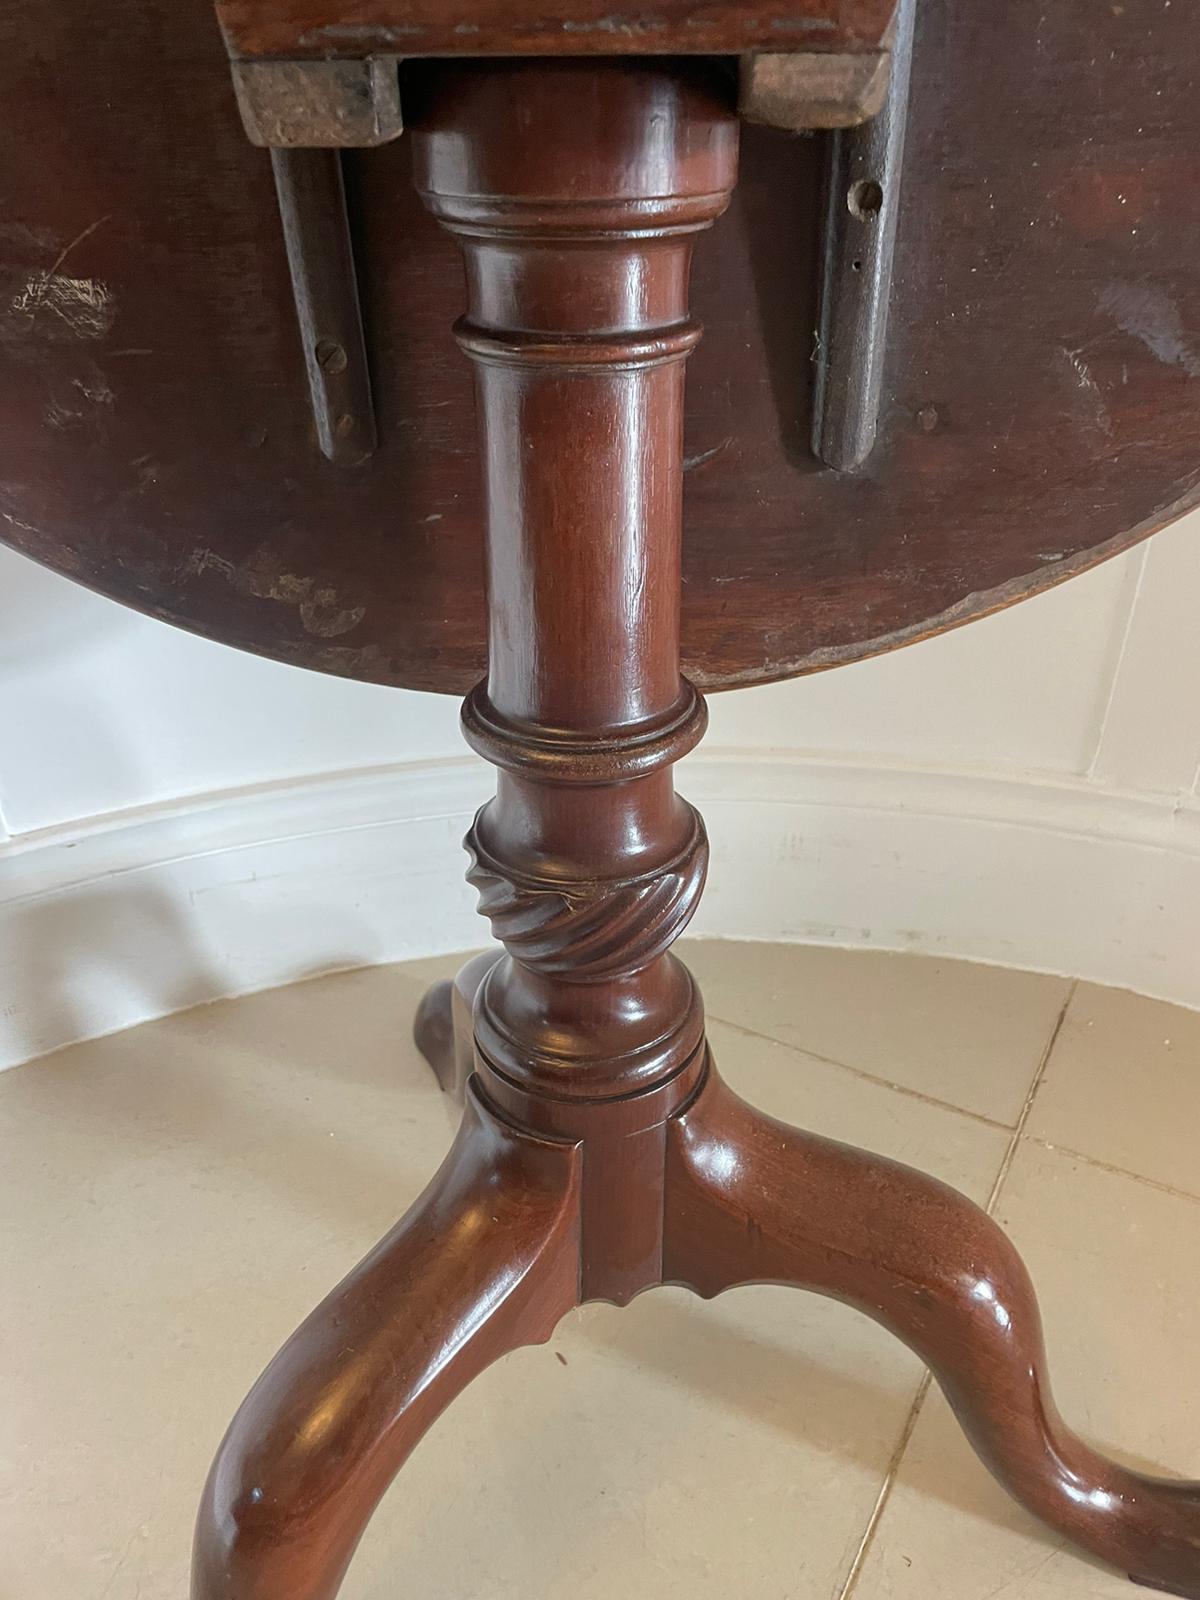 Antique George III quality mahogany bird cage tripod/lamp table having a quality mahogany circular tilt top supported by a mahogany birdcage and a turned carved tapering mahogany pedestal column standing on shaped cabriole legs with pad feet